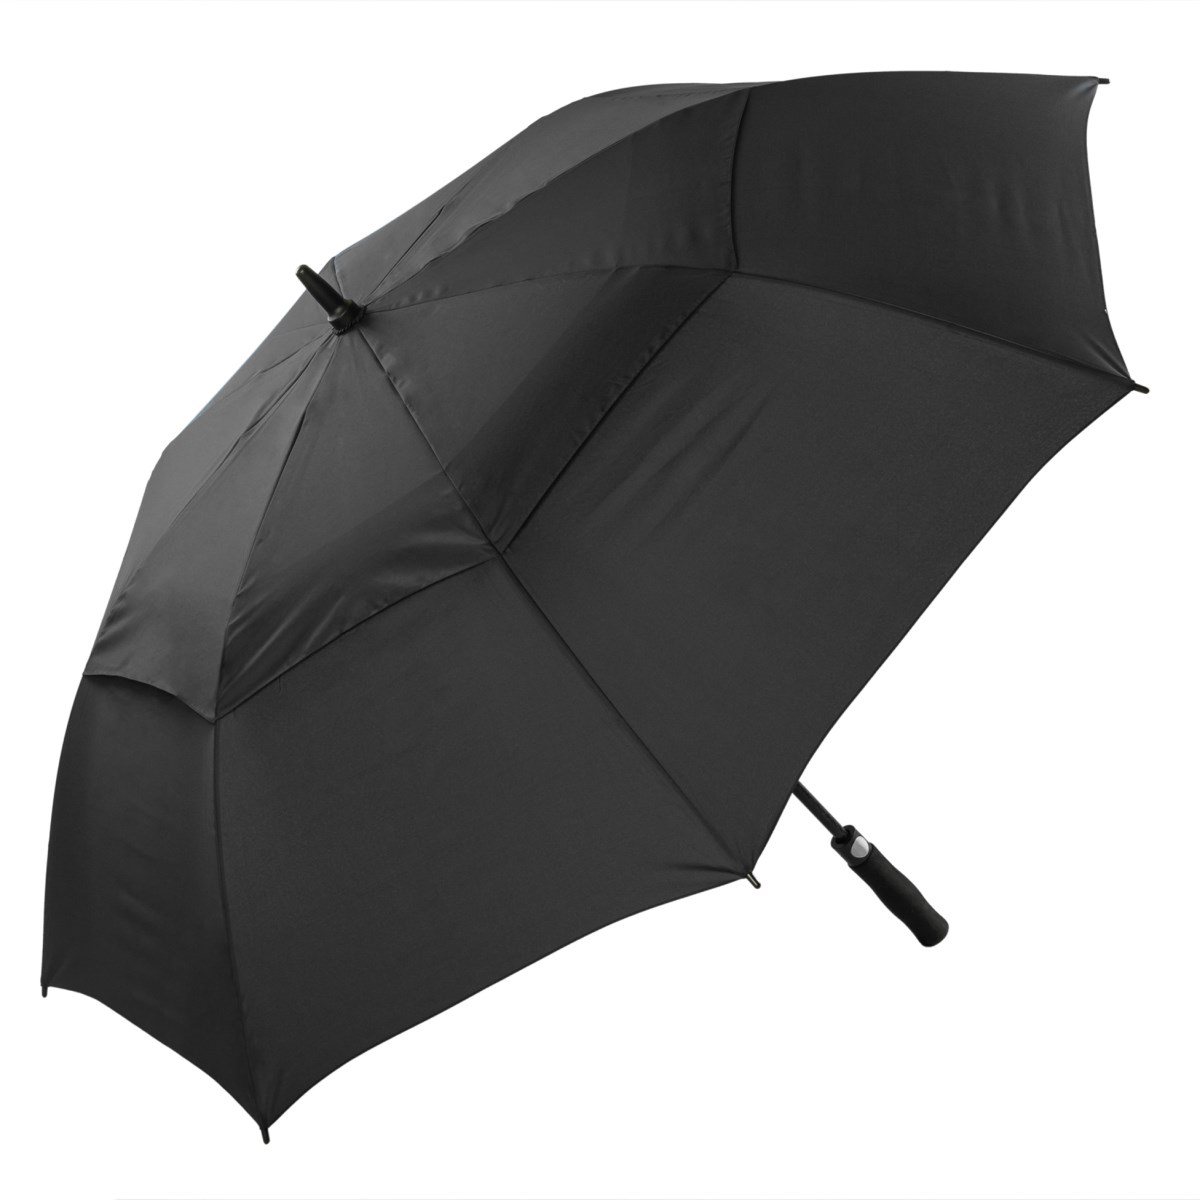 Black Vented Windproof Automatic Golf Umbrella - open, angled